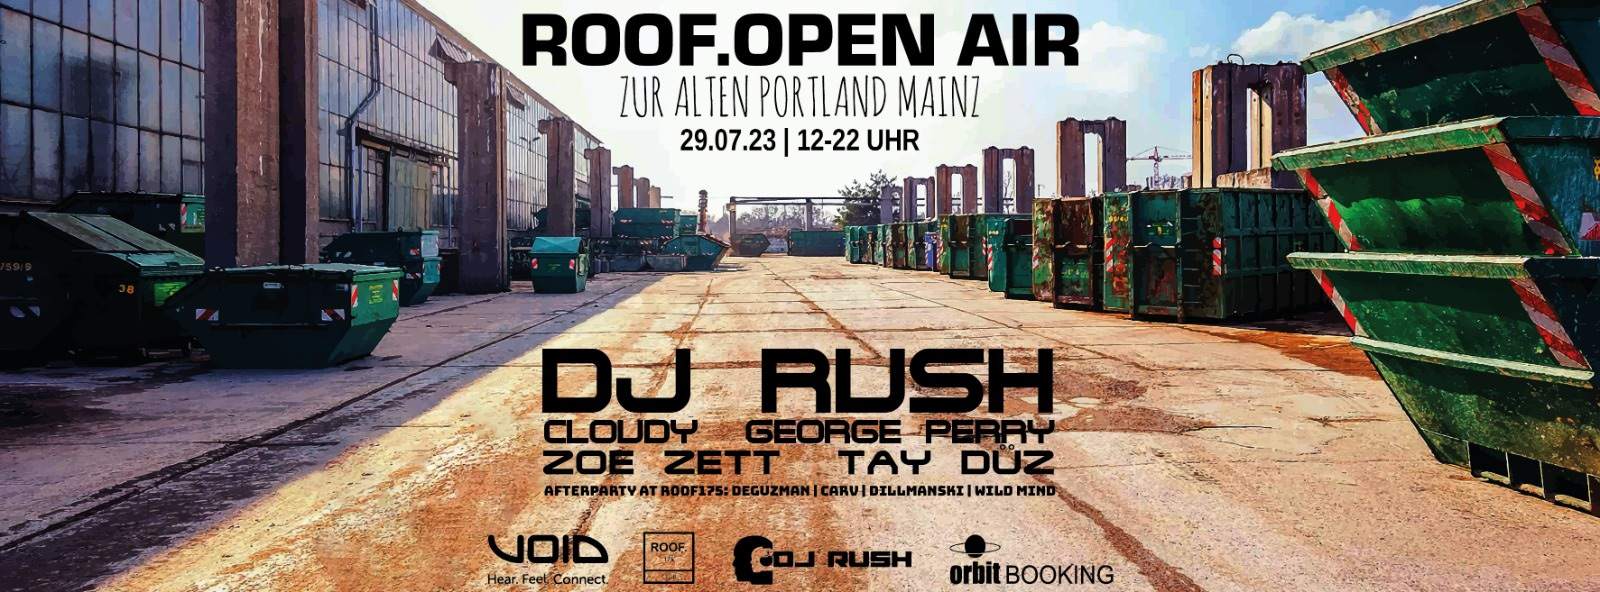 ROOF. Open Air with DJ Rush & Cloudy - フライヤー表